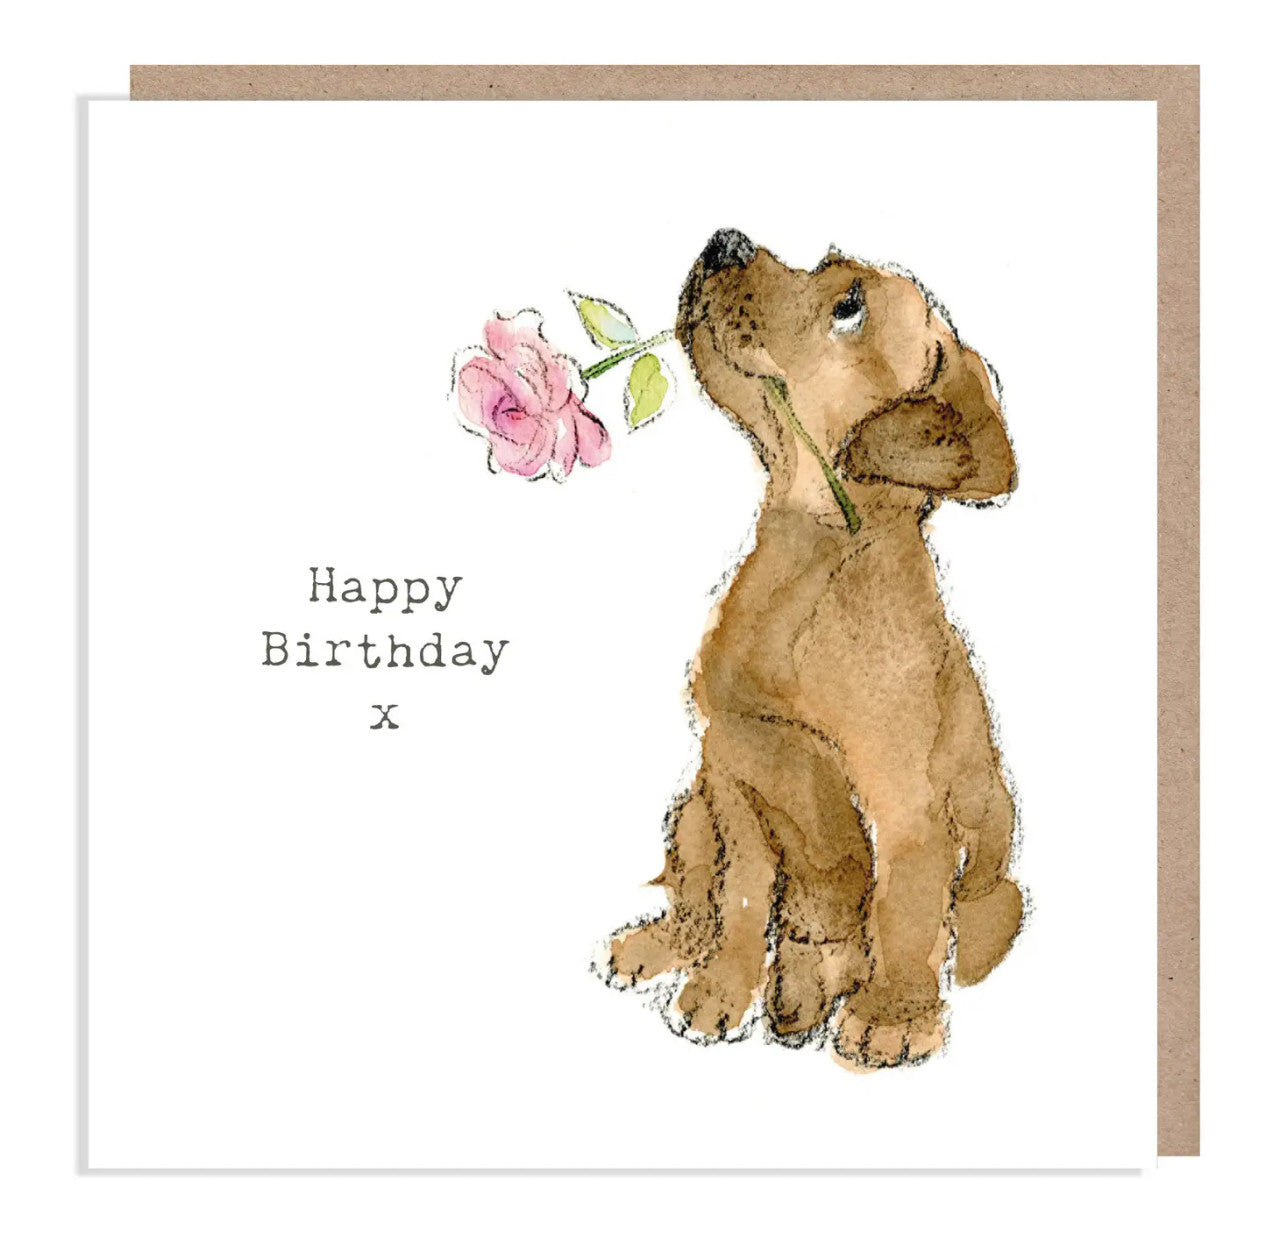 Chocolate Lab with Pink Rose Happy Birthday Greetings Card by Paper Shed Design